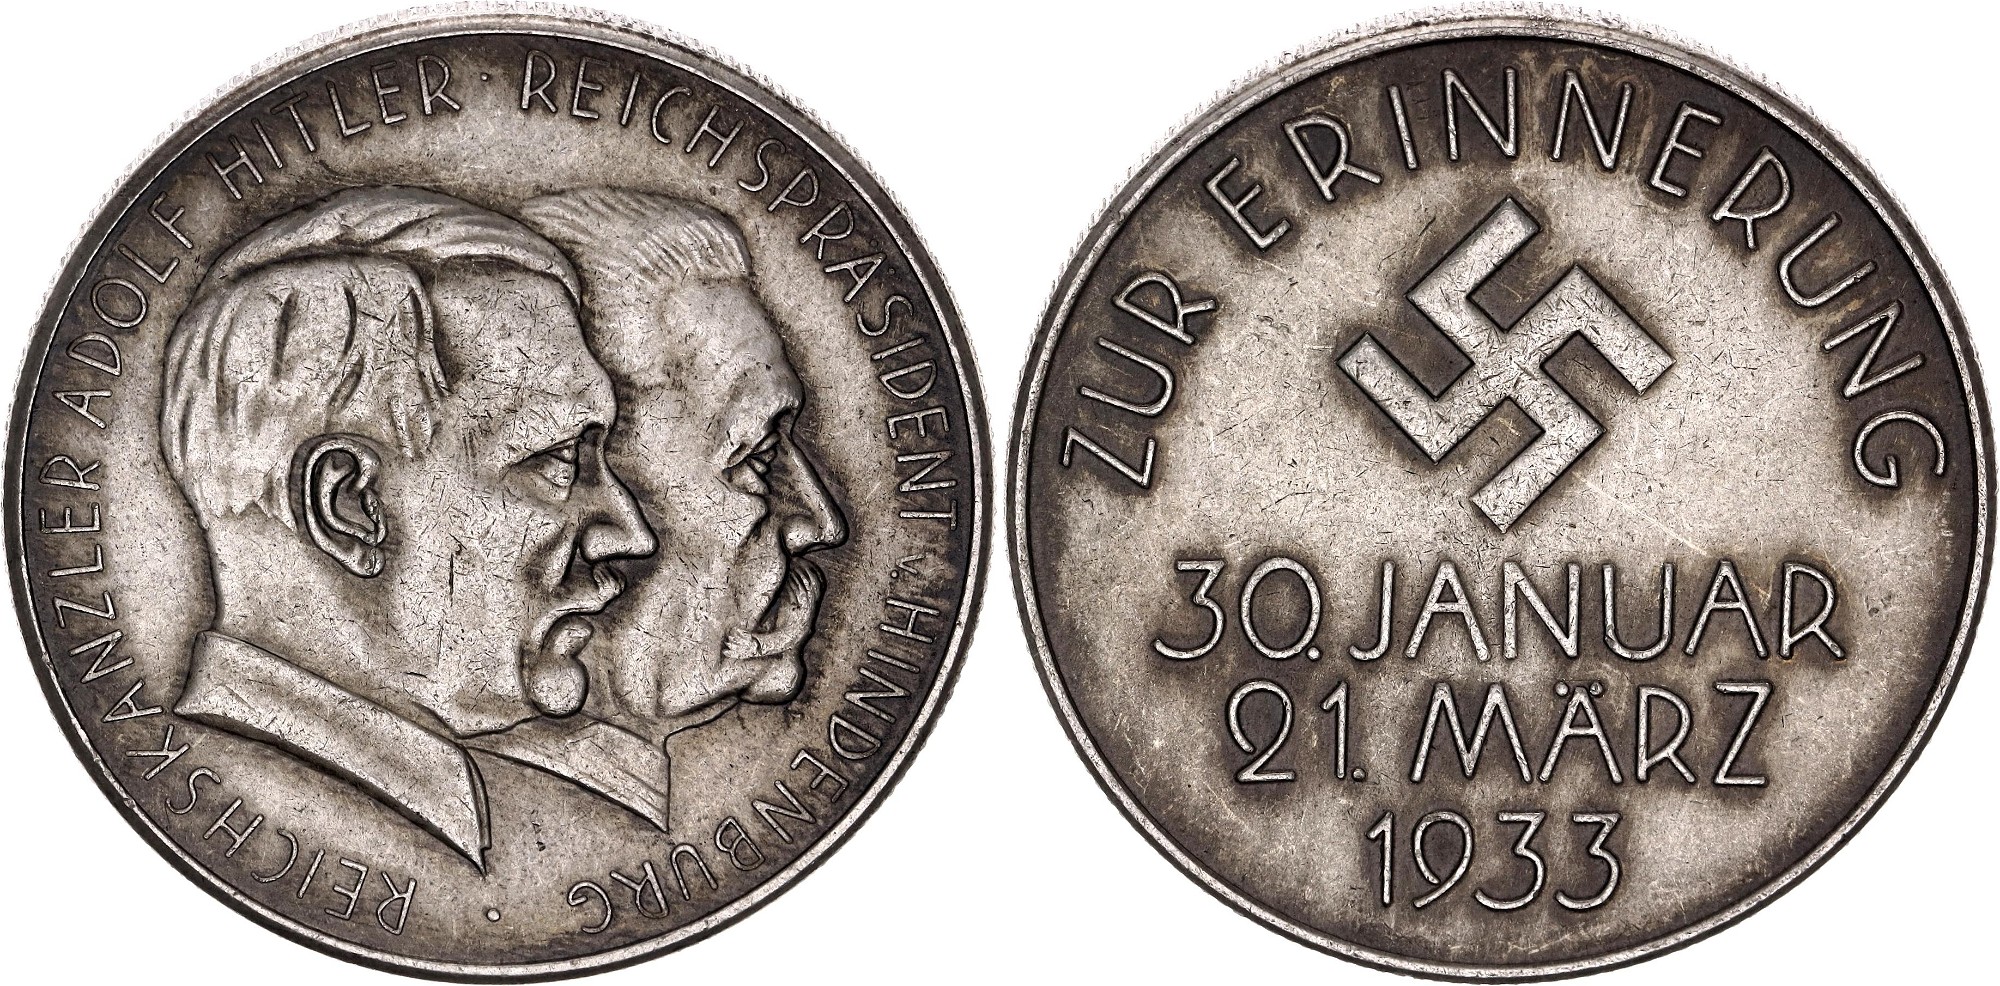 Germany - Third Reich Silver Commemorative Medal 